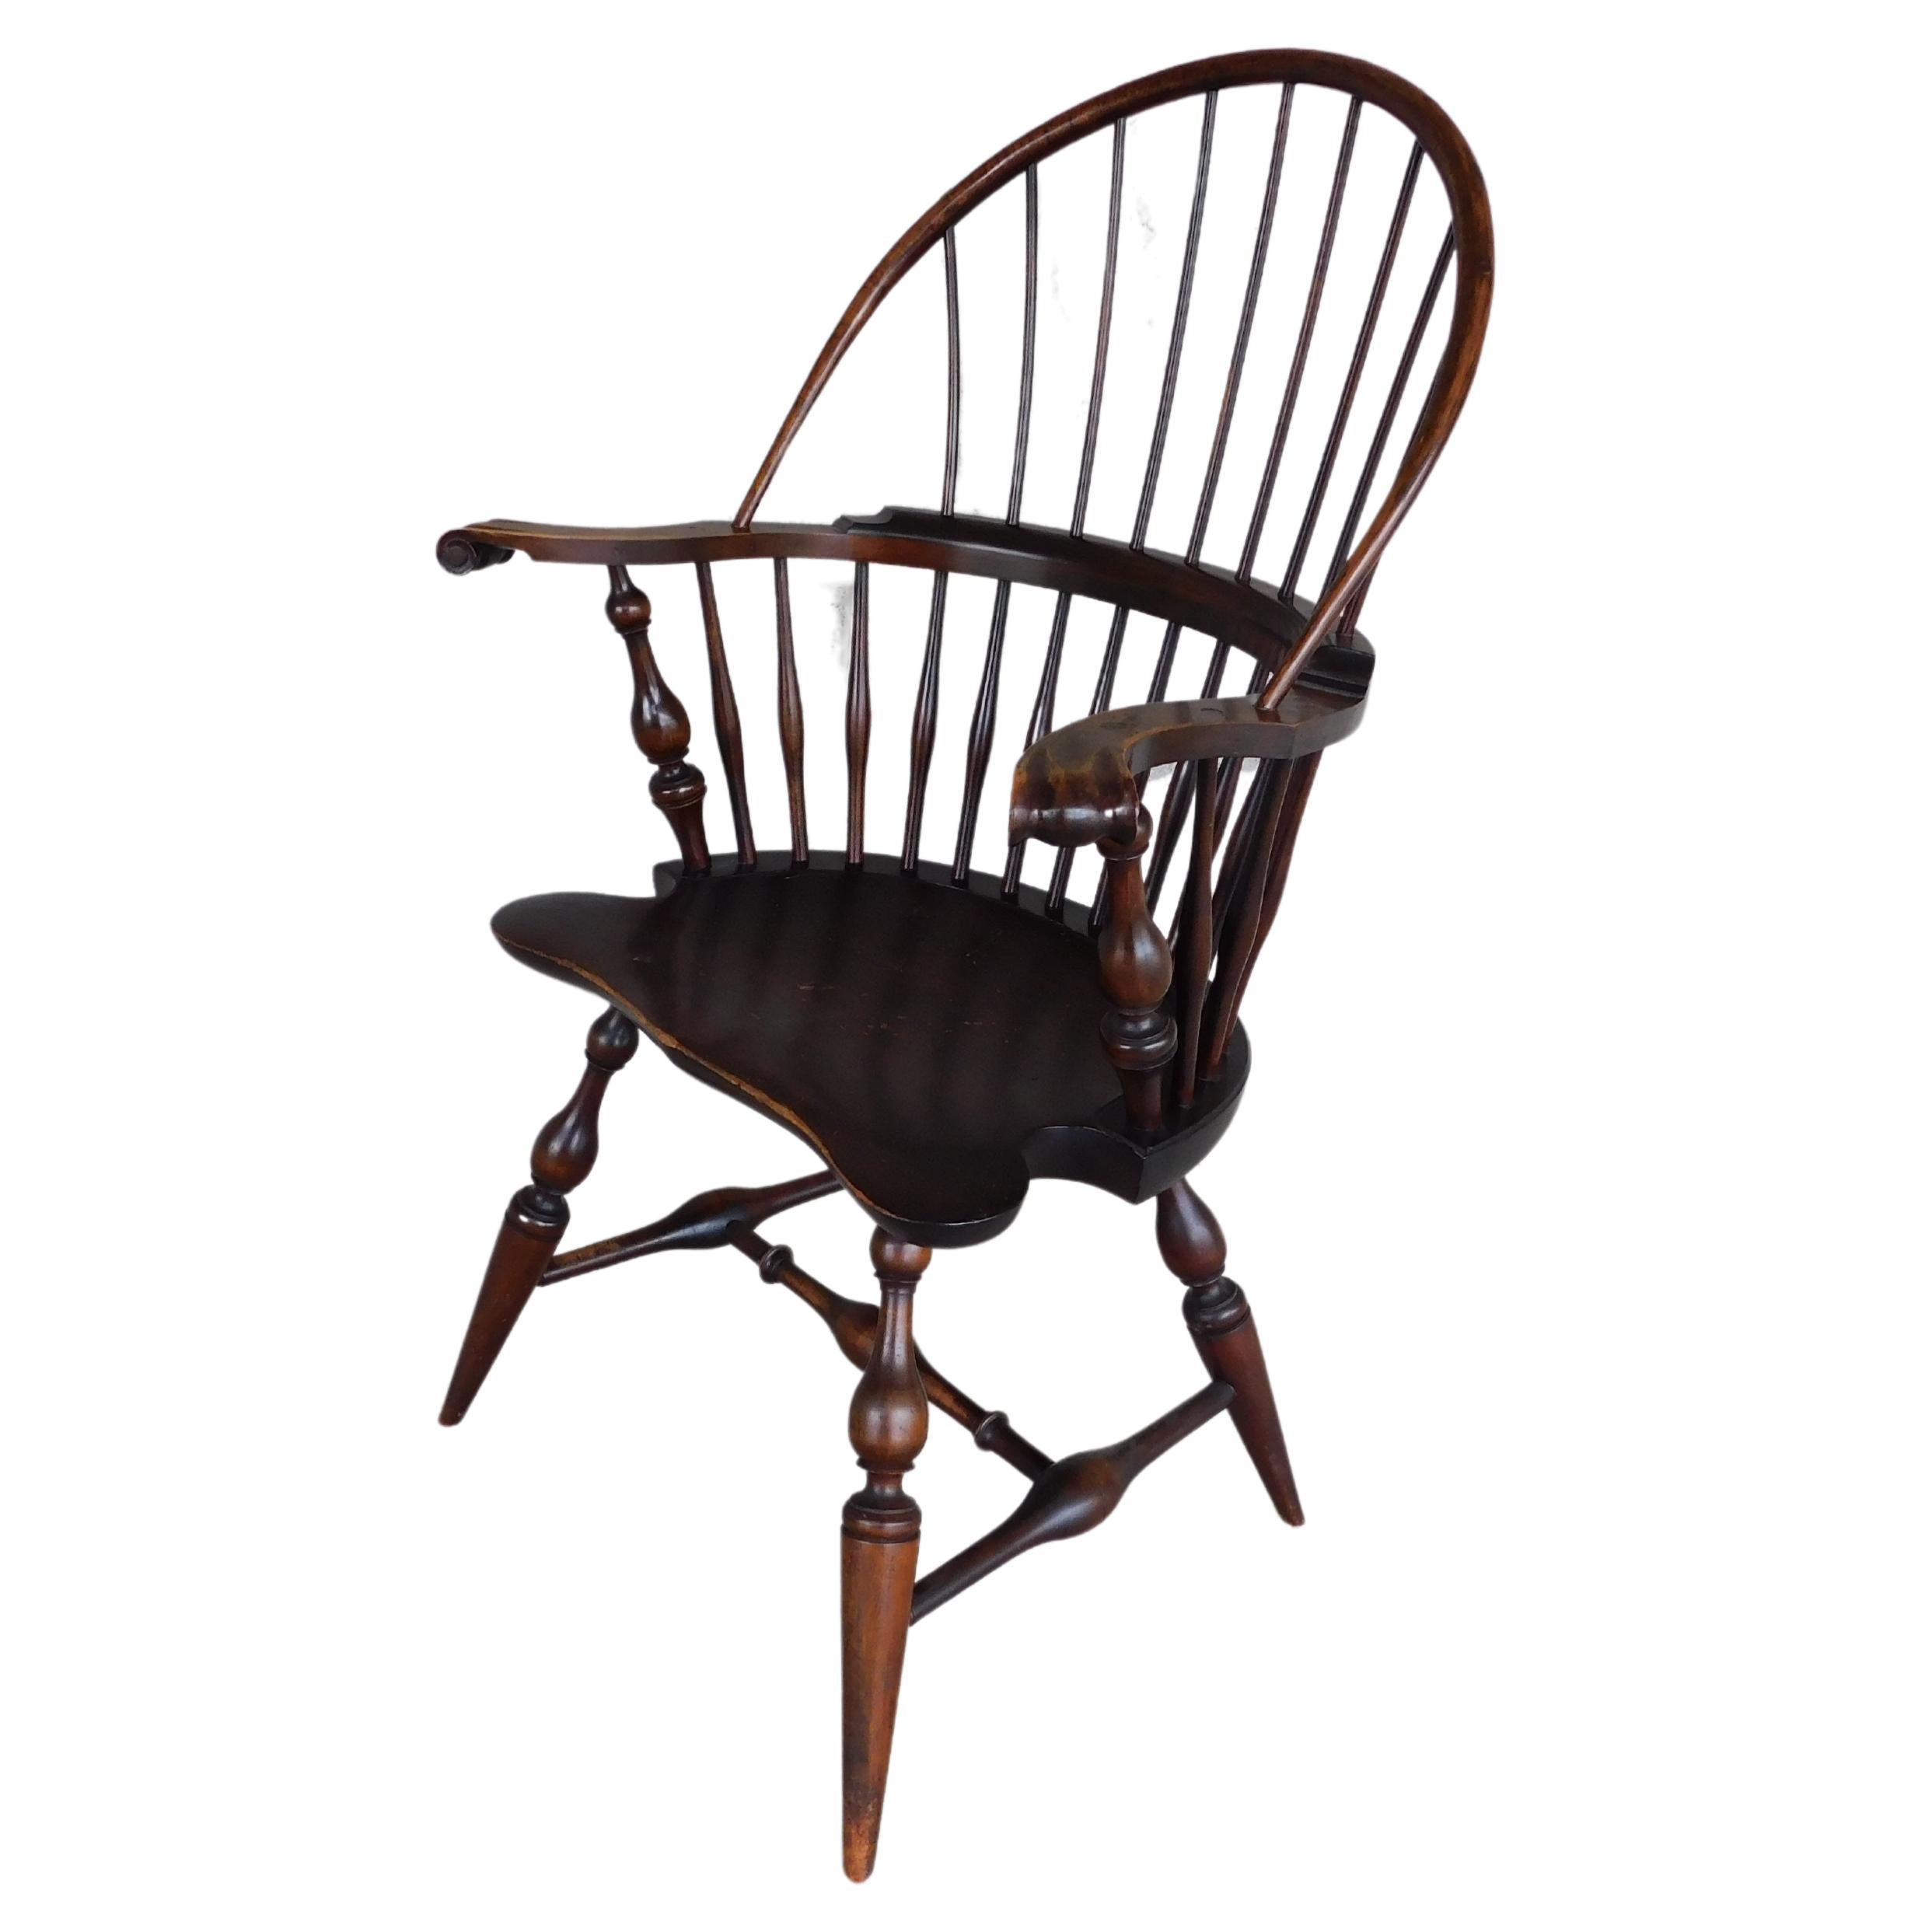 Wallace Nutting #420 Bow Back Windsor Arm Chair